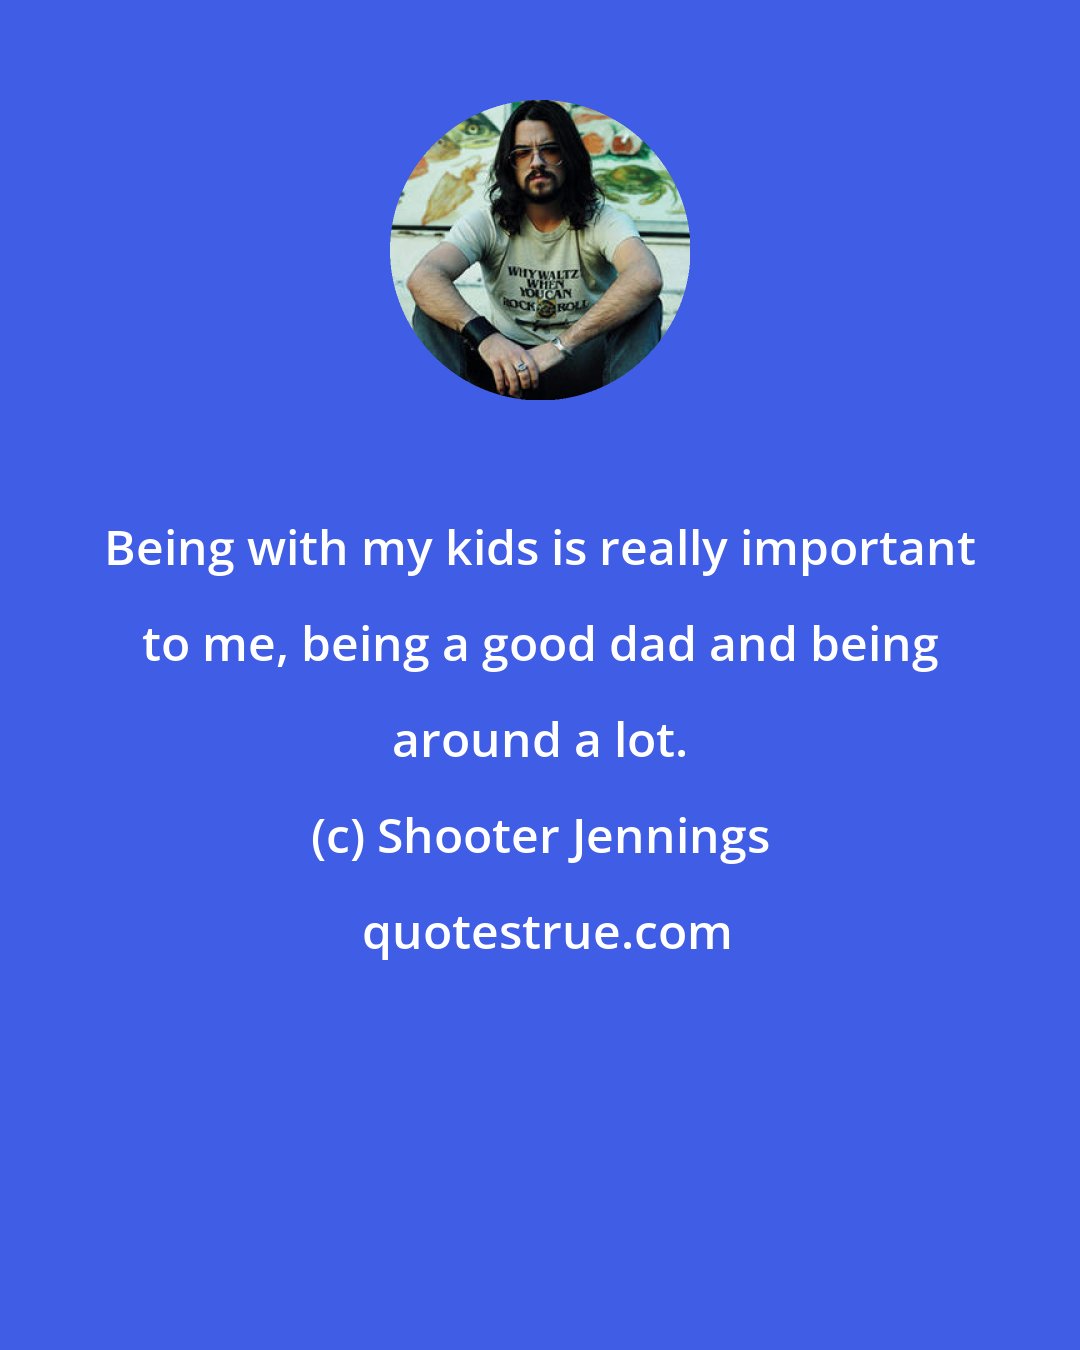 Shooter Jennings: Being with my kids is really important to me, being a good dad and being around a lot.